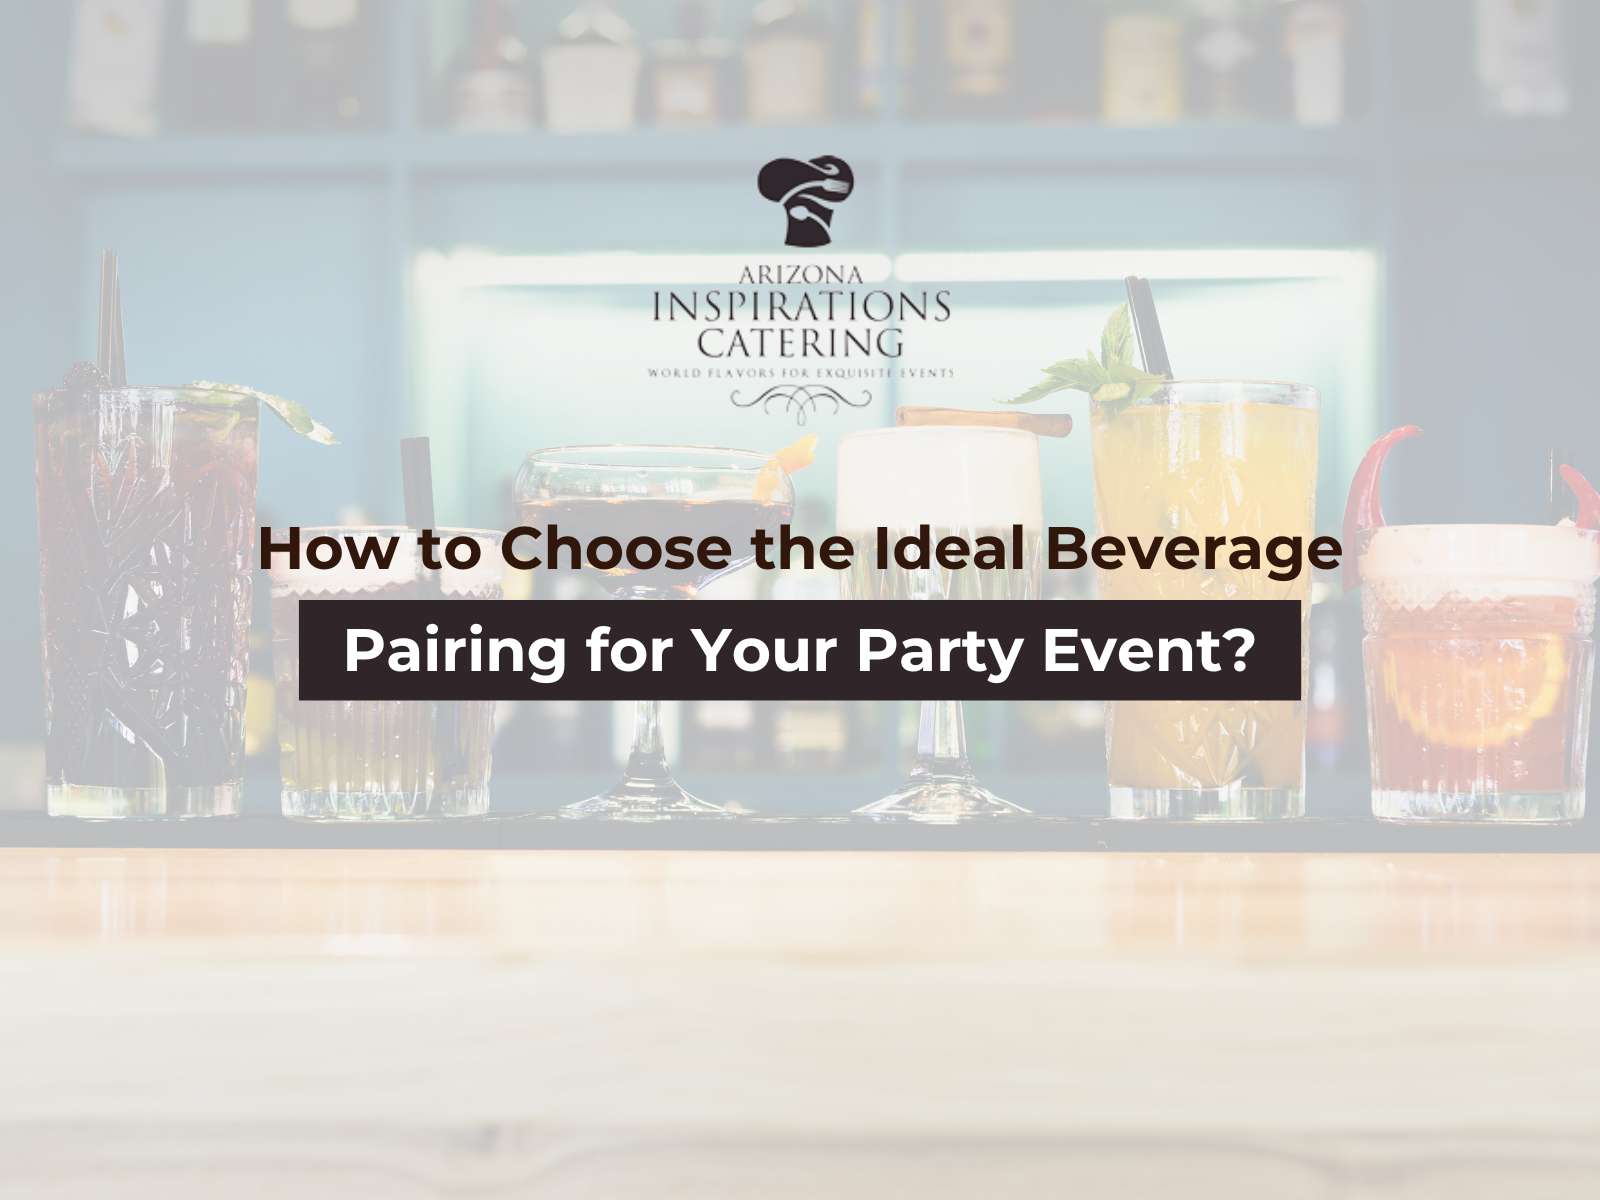 How to Choose the Ideal Beverage Pairing for Your Party Event?